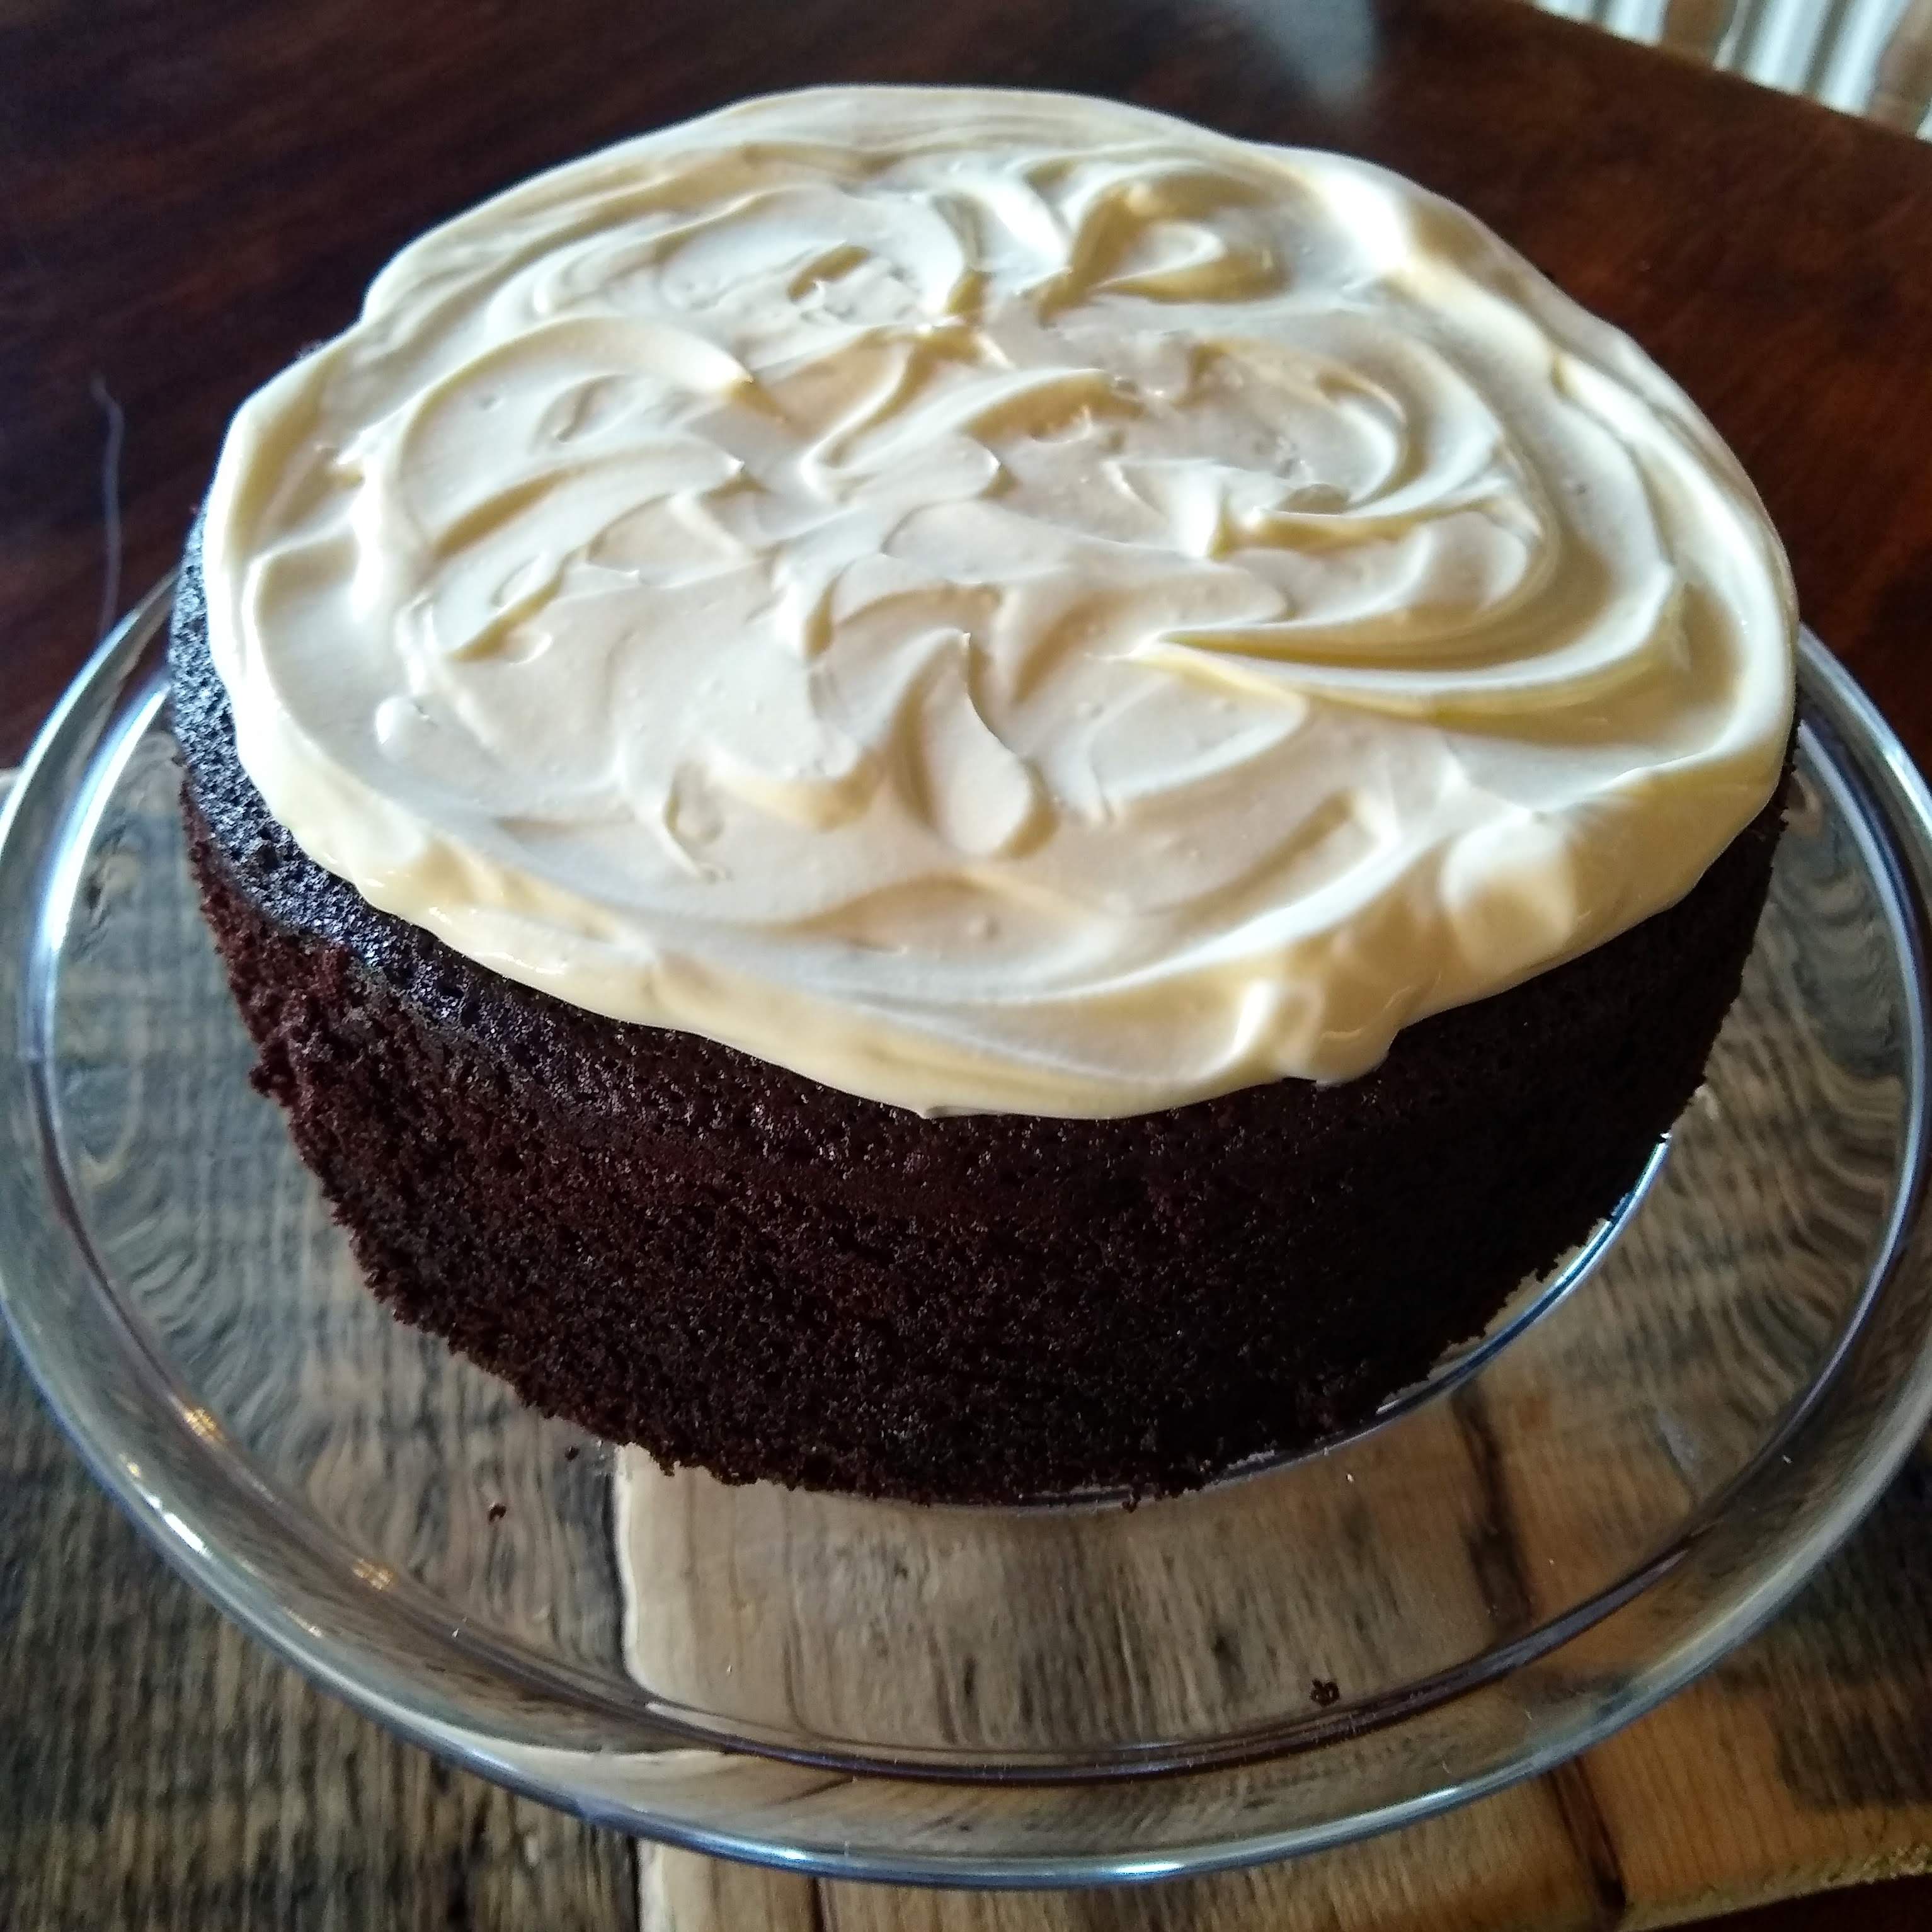 Chocolate and Guinness cake